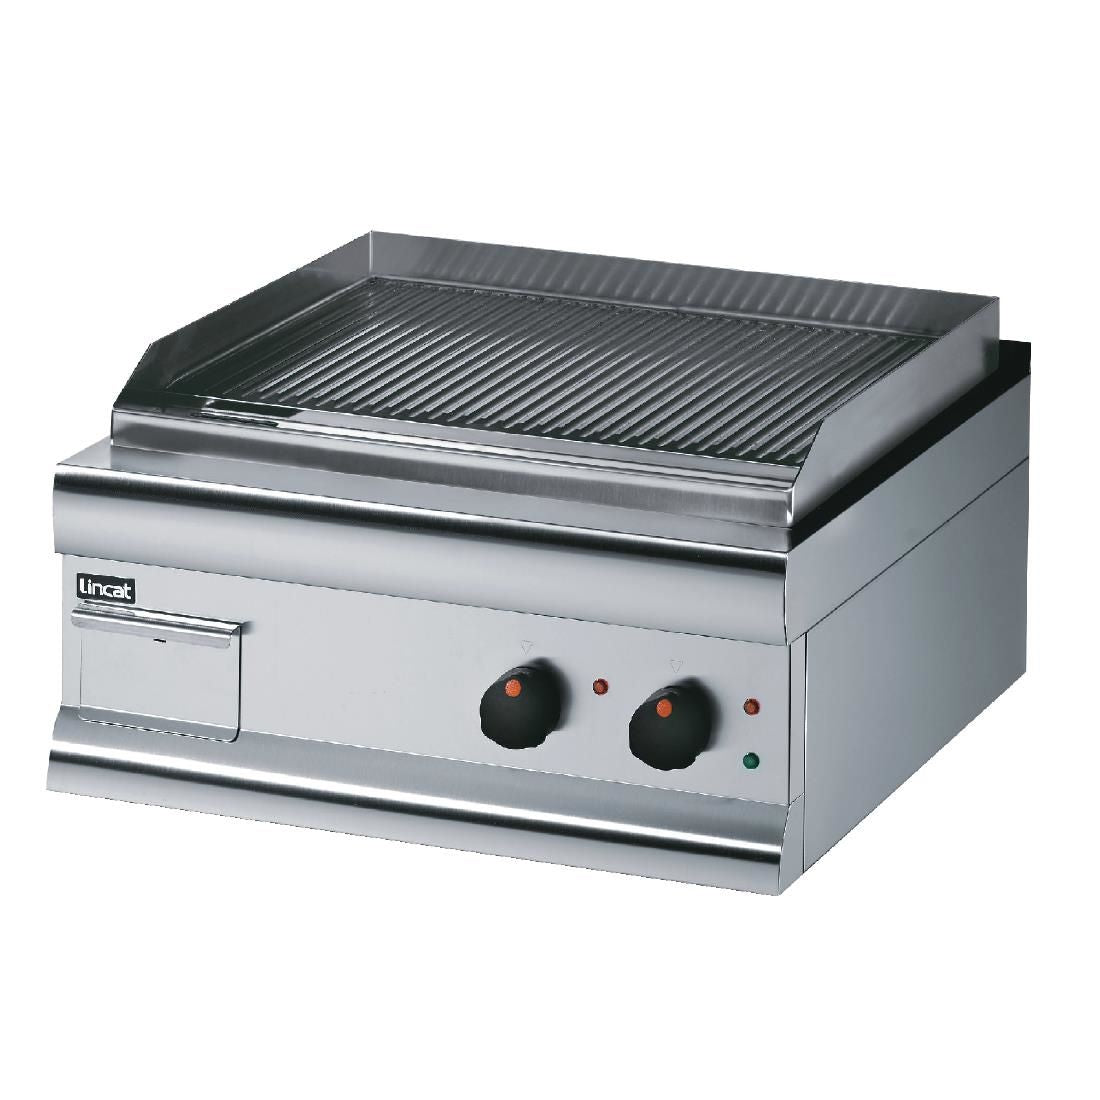 GS6/TFR - Lincat Silverlink 600 Electric Counter-top Griddle - Twin Zone - Fully-Ribbed Plate - W 600 mm - 4.0 kW F924 JD Catering Equipment Solutions Ltd